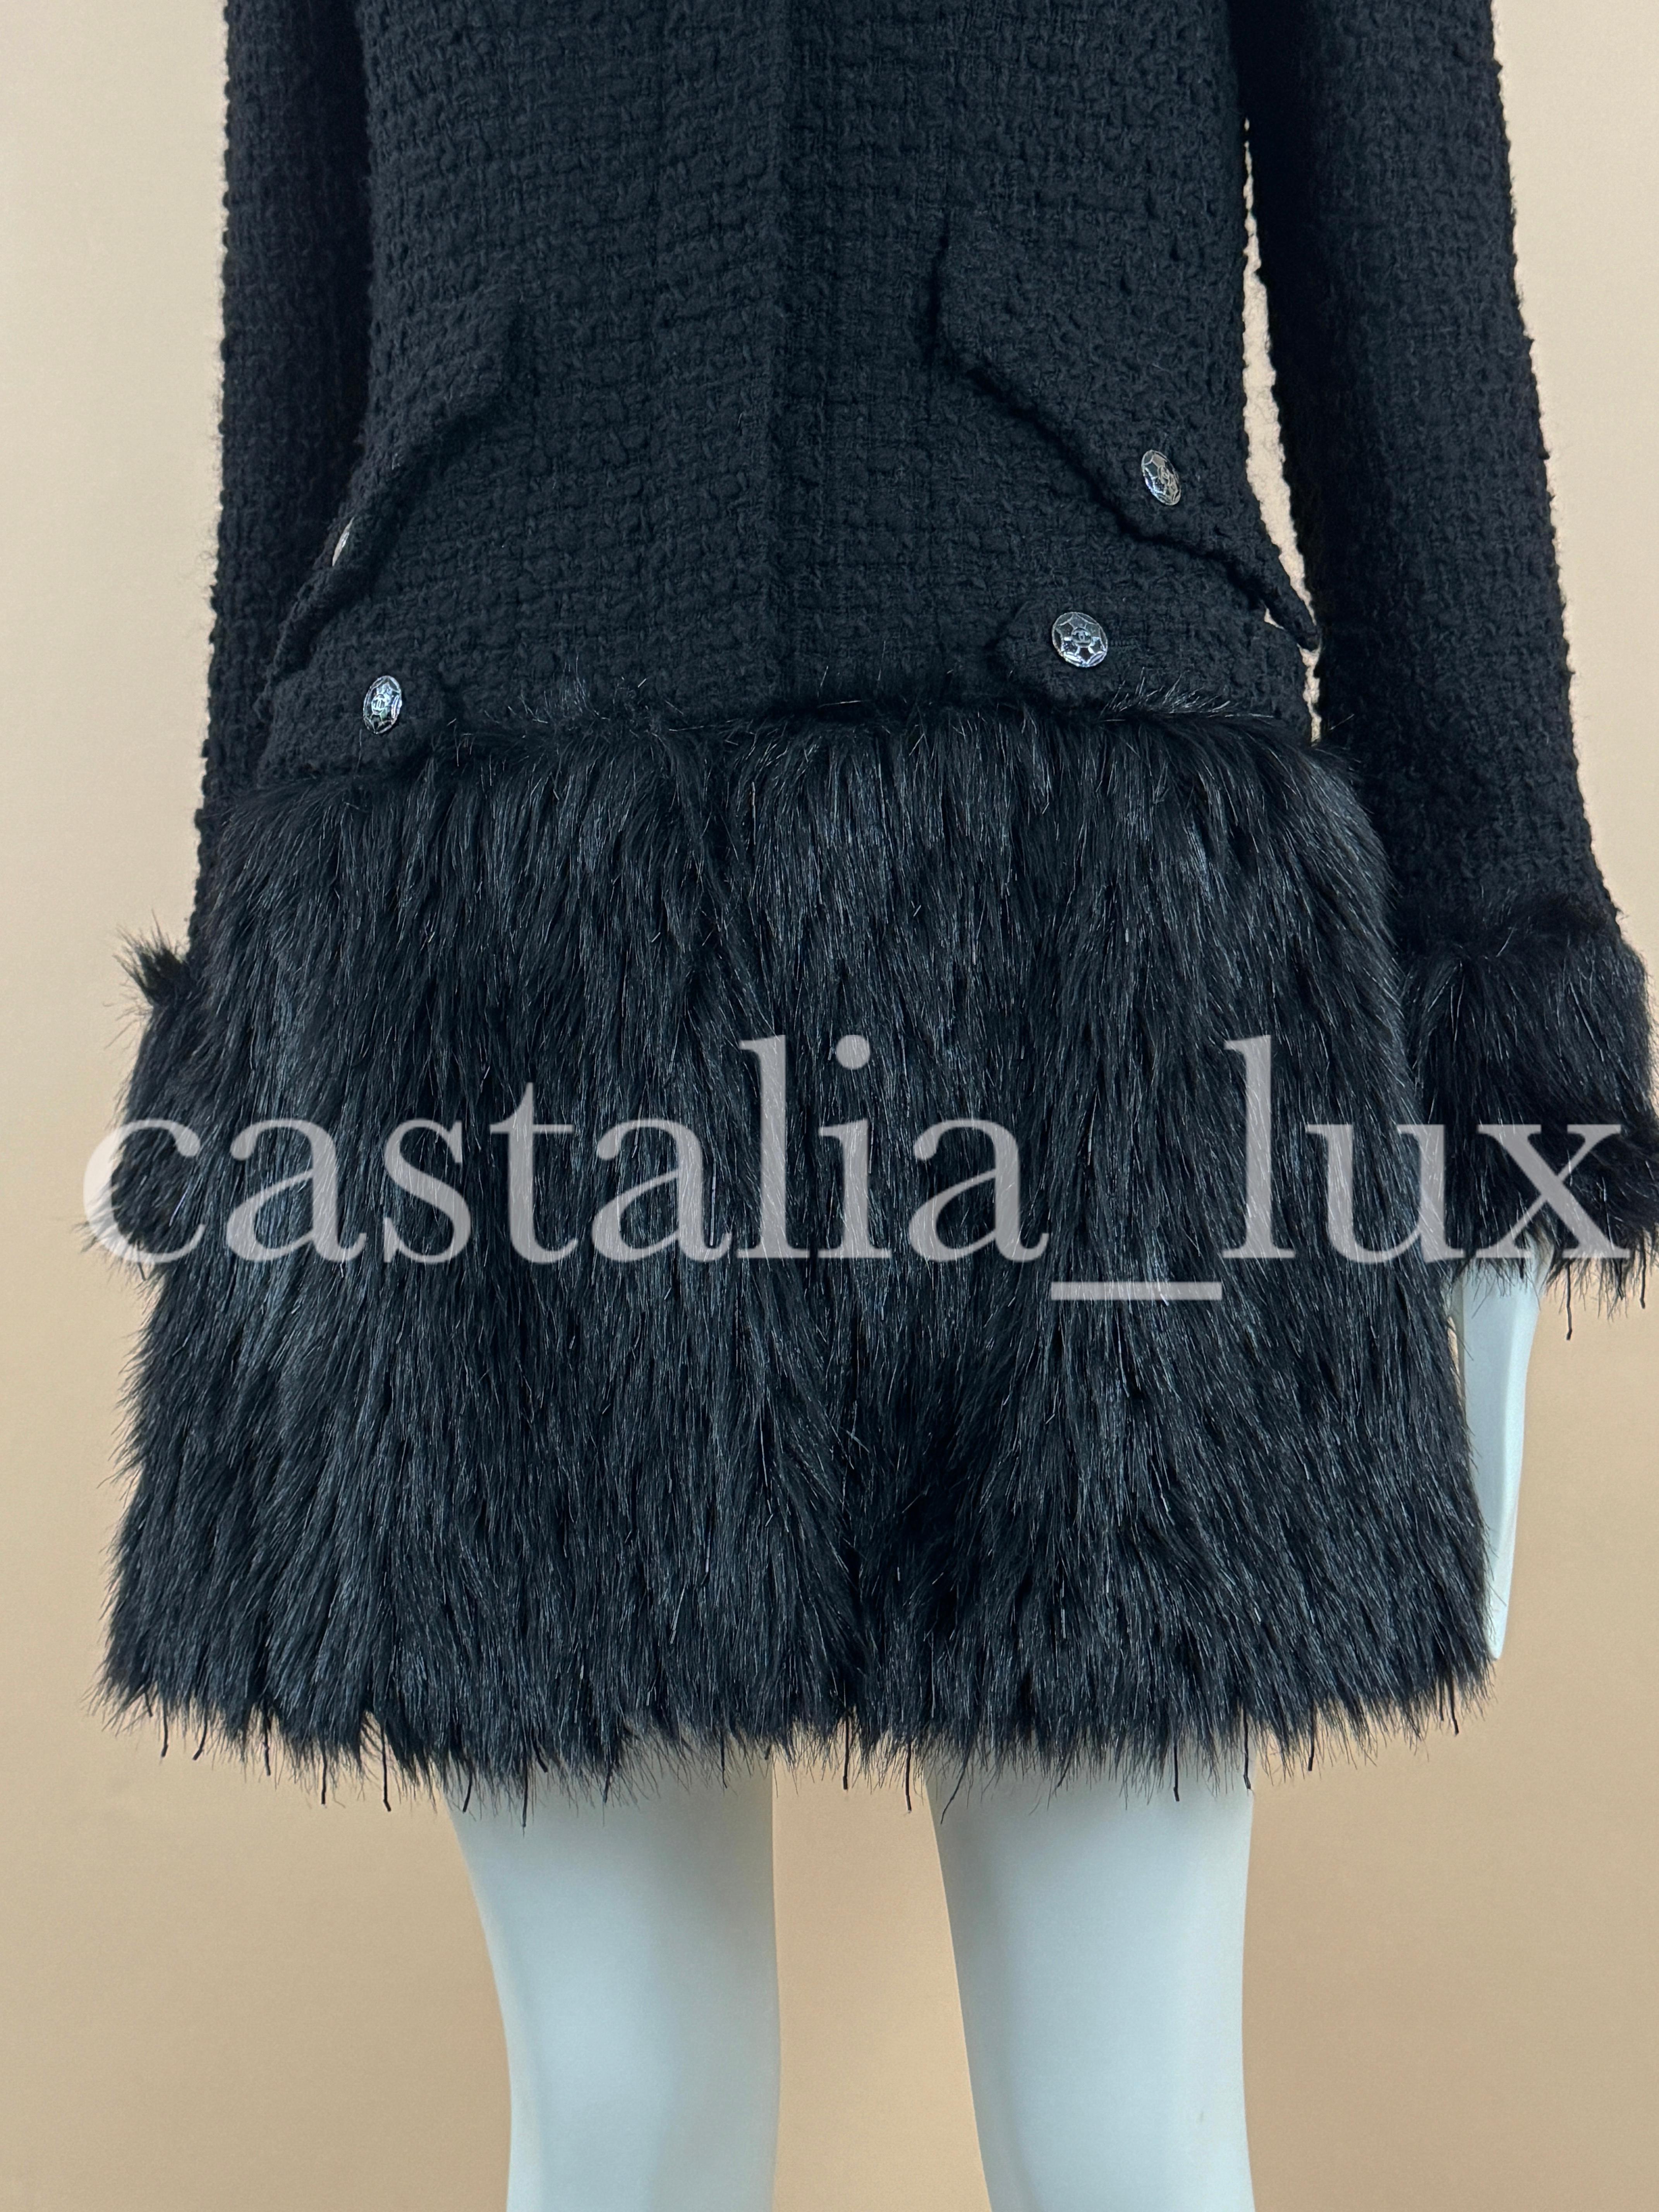 Chanel Jewel Embellishment Black Tweed Coat with Faux Fur Details For Sale 6